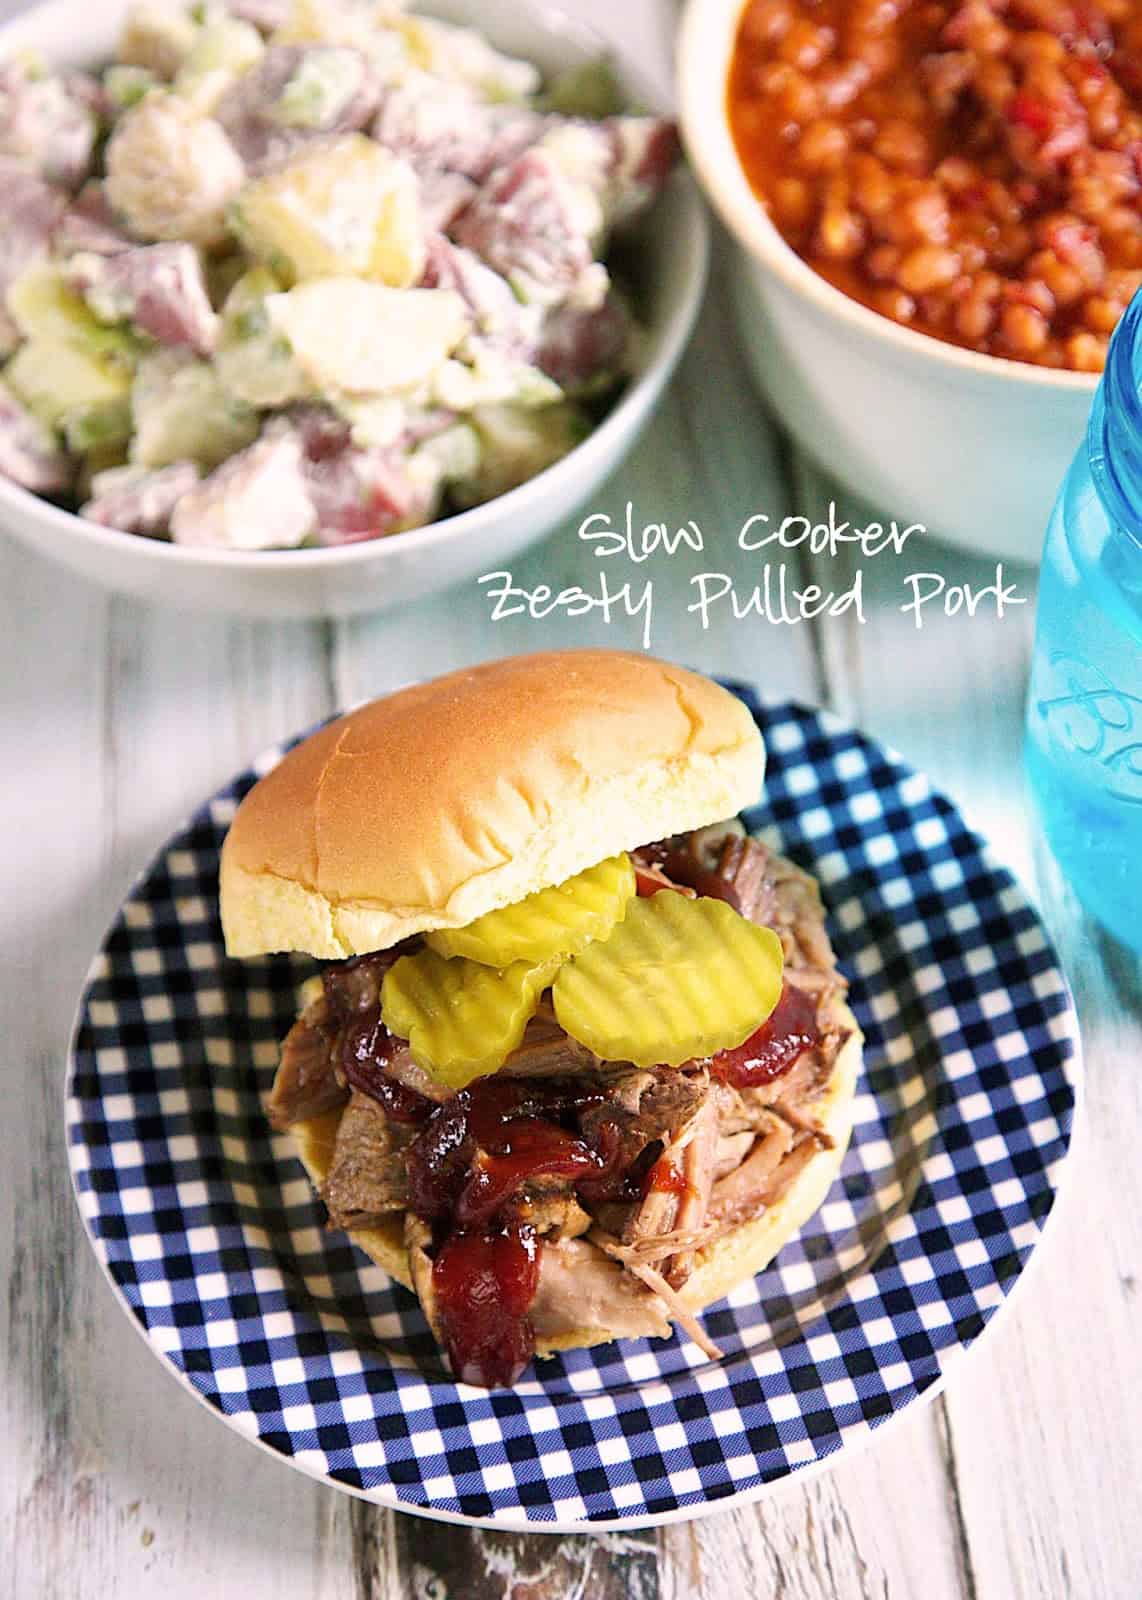 Slow Cooker Zesty Pulled Pork Recipe - pork shoulder slow cooked all day in a mixture of garlic, onion, brown sugar, soy sauce and vinegar - our new go-to slow cooker pulled pork recipe! 